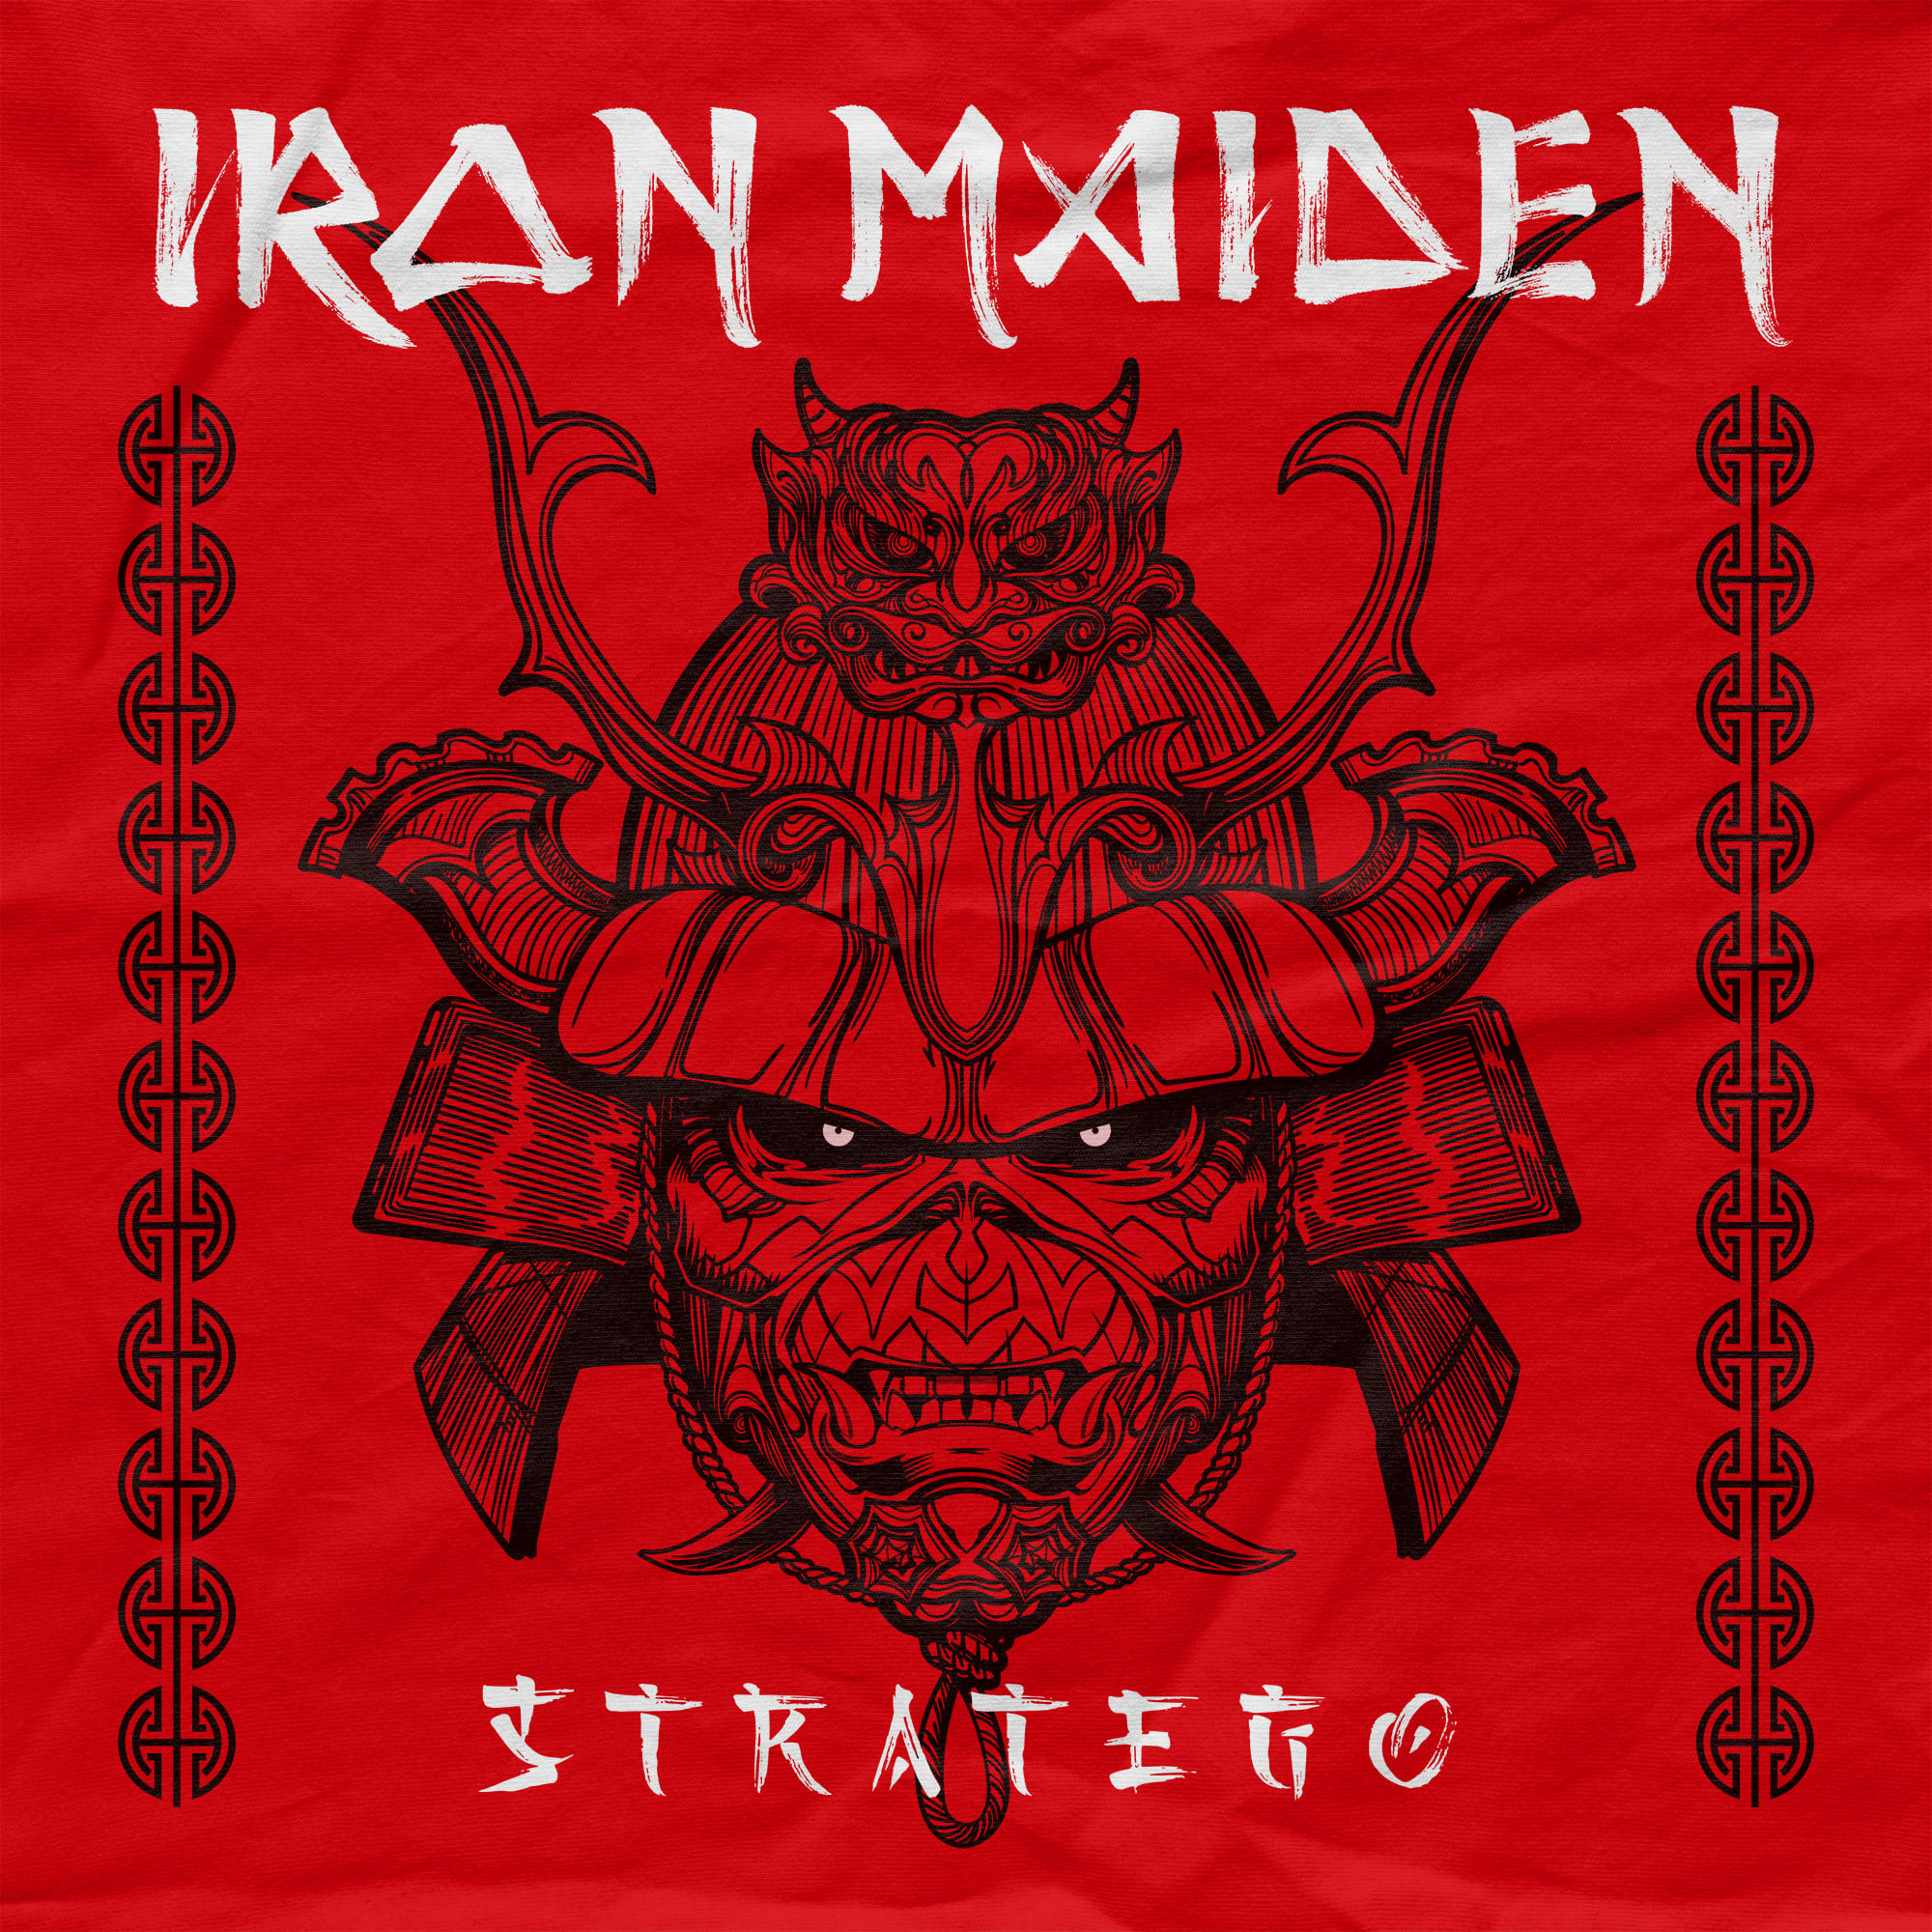 iron maiden - stratego pic 1